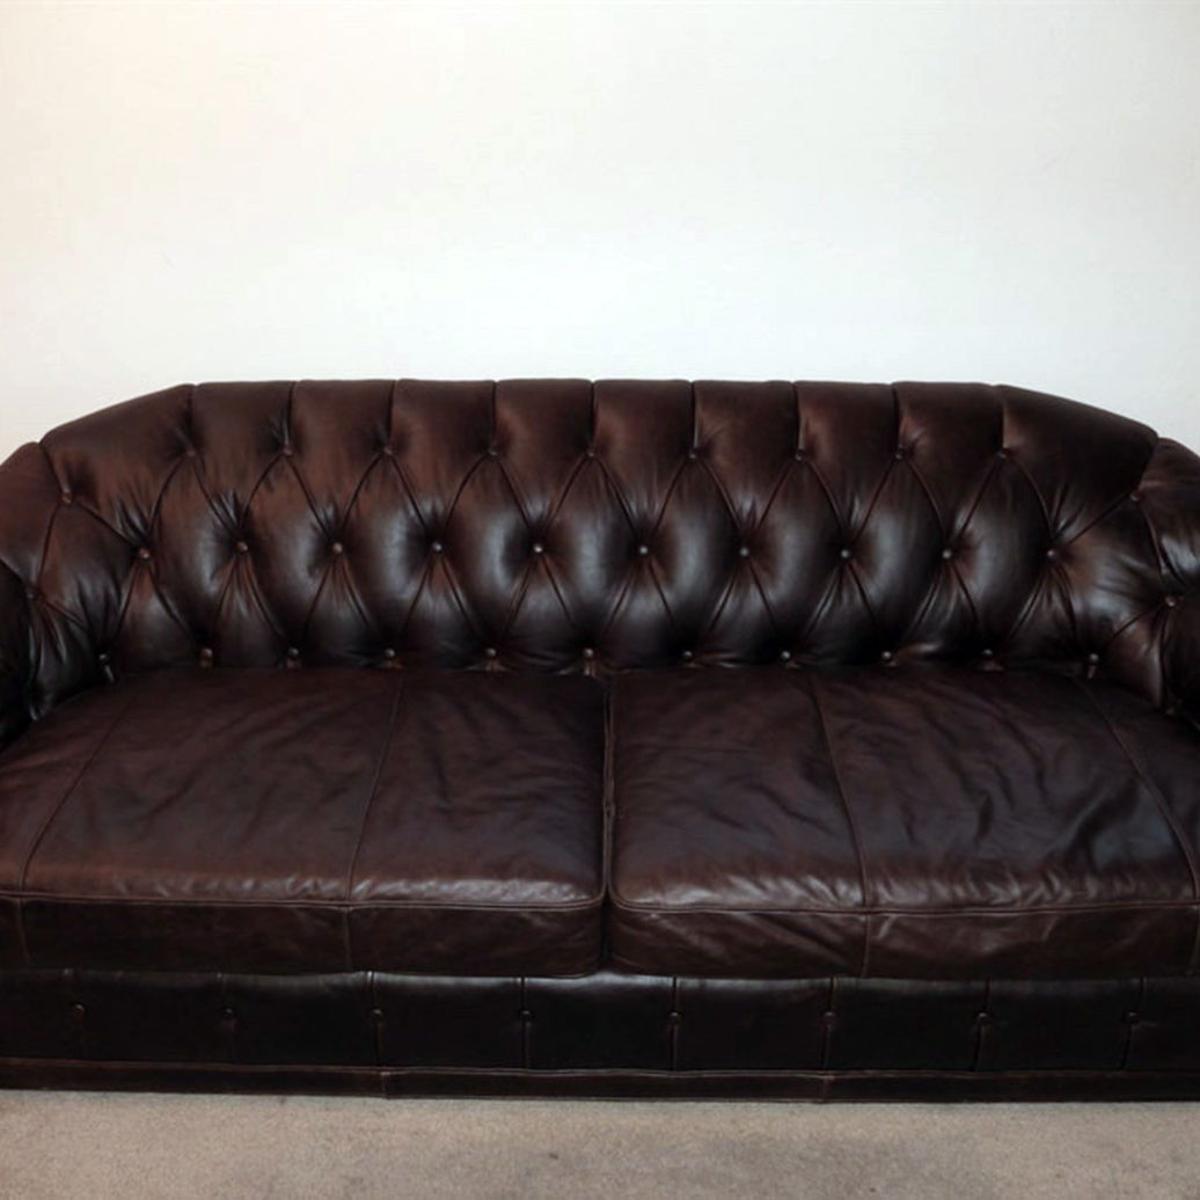 Cost To Clean A Leather Couch, Leather Couch Cost